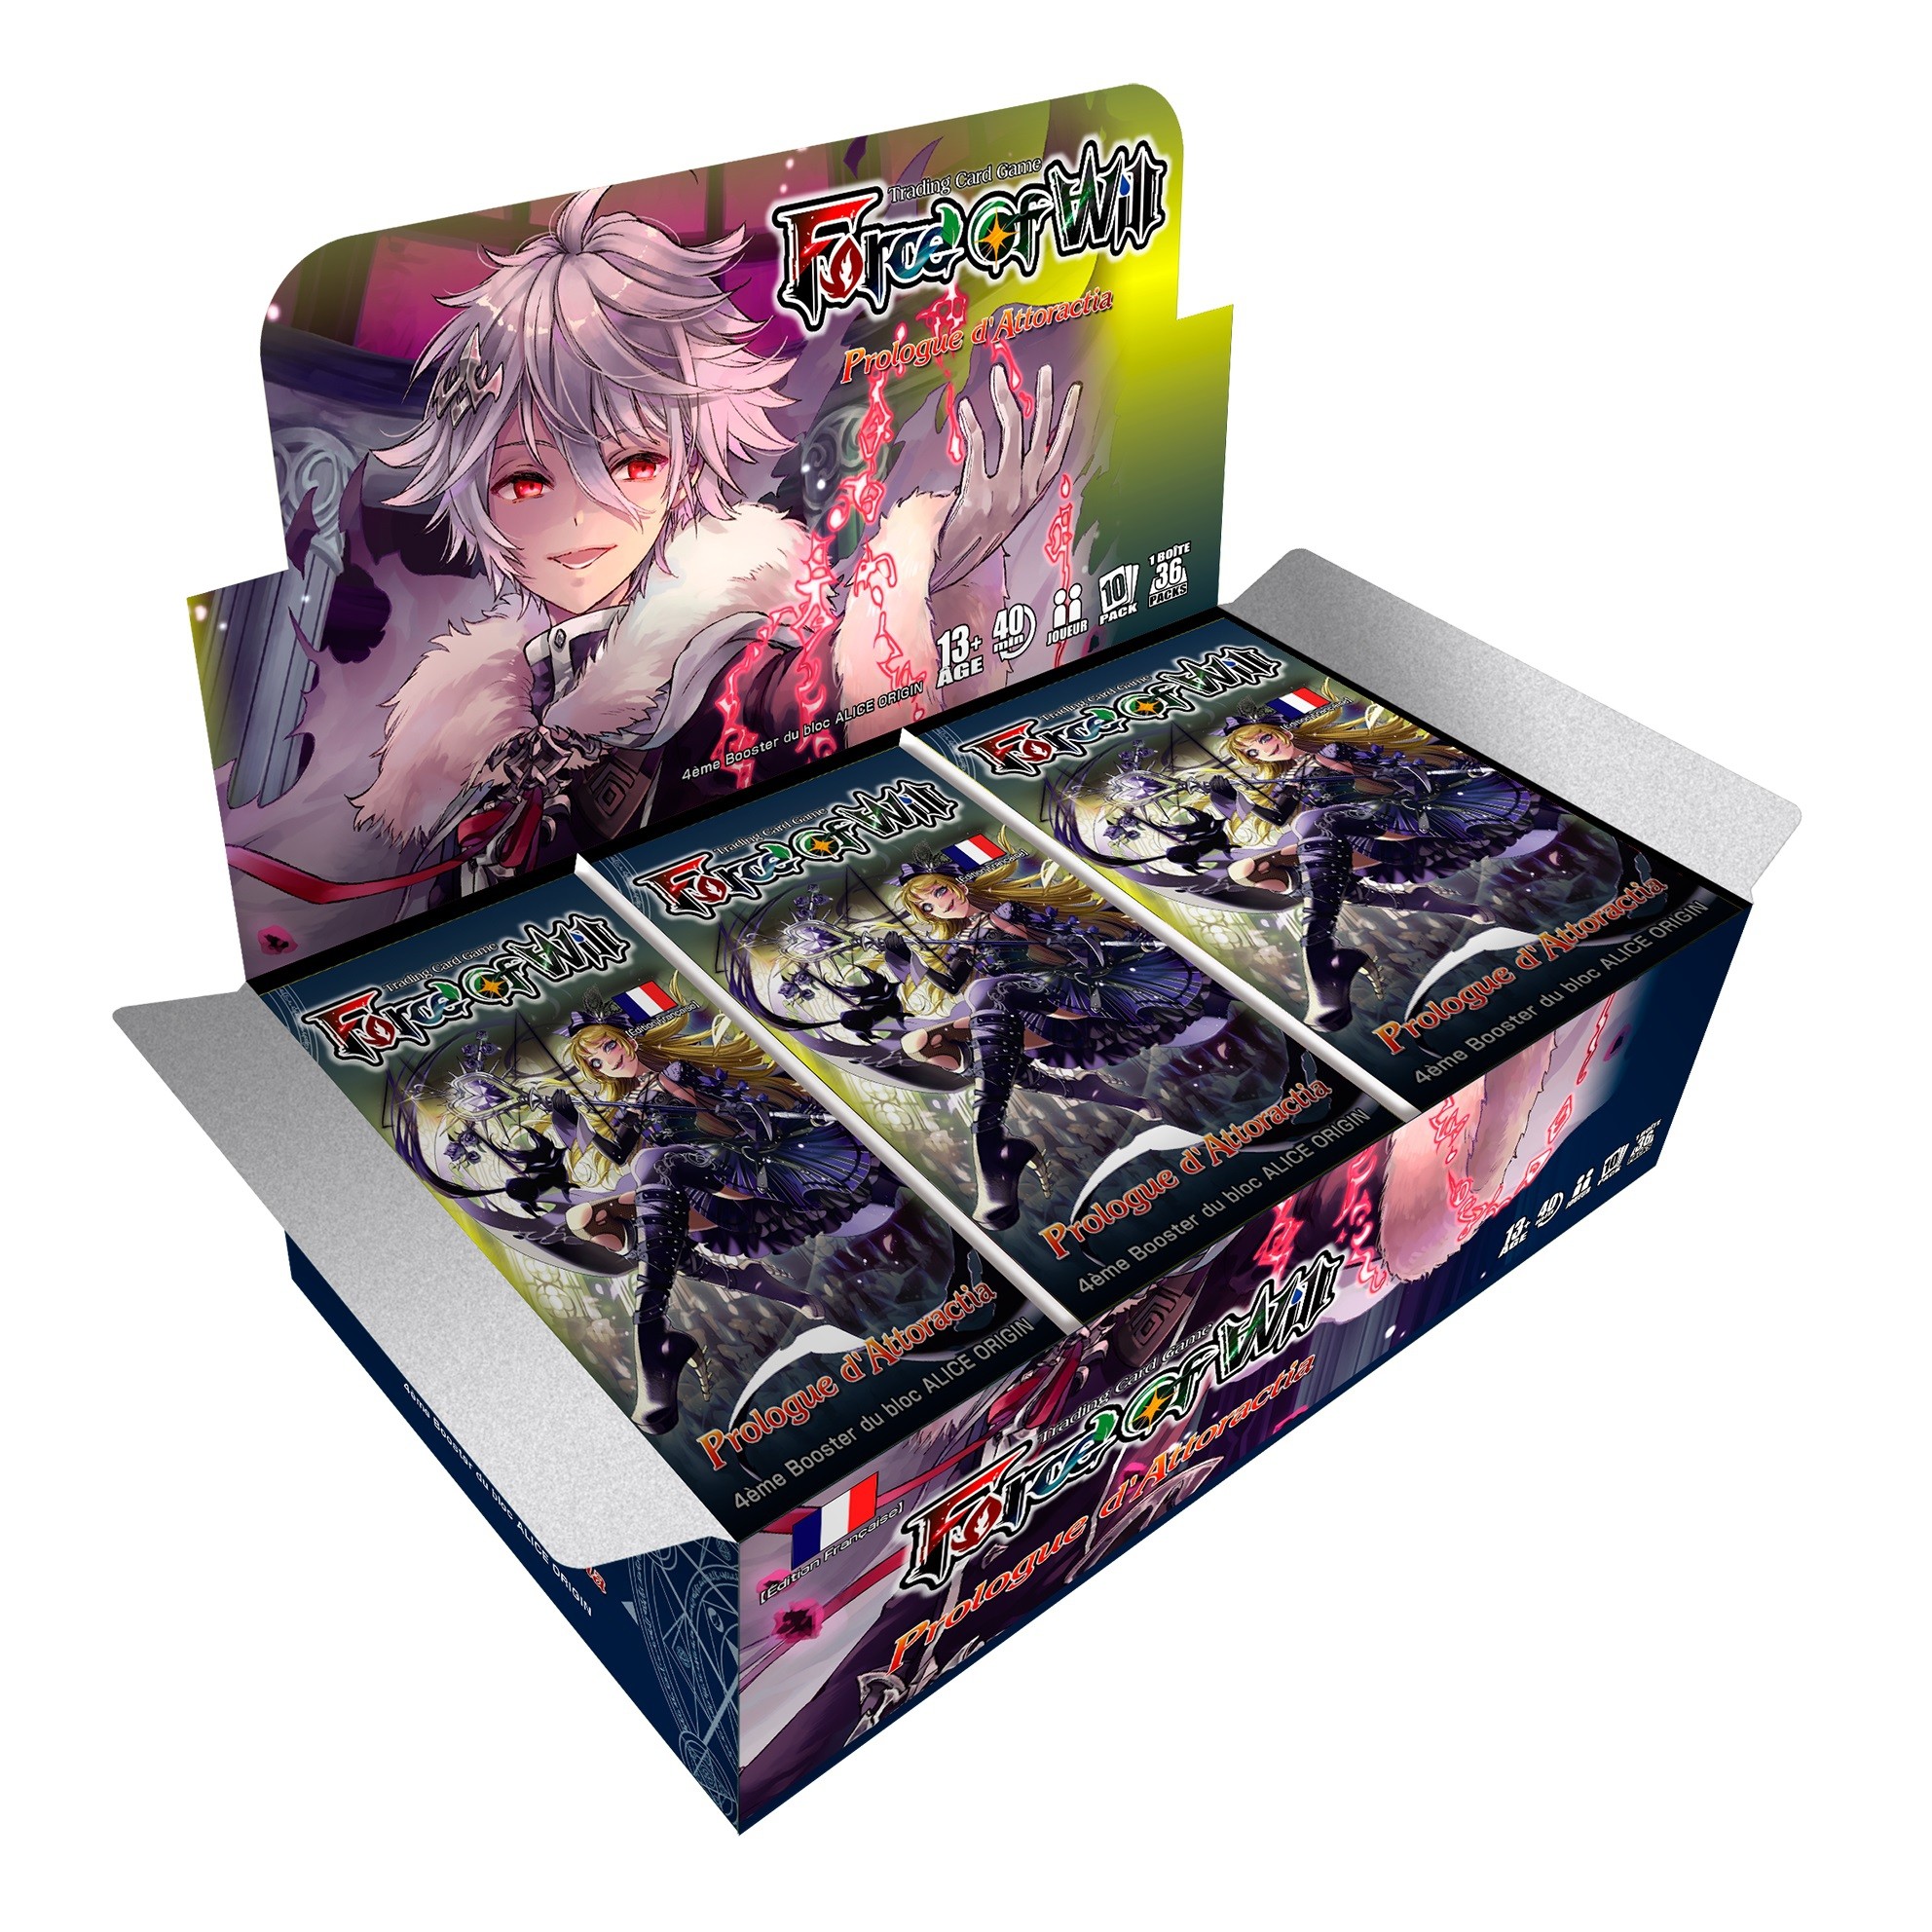 TCG display neuf FR force of will les vents de la lune funeste 36 boosters 